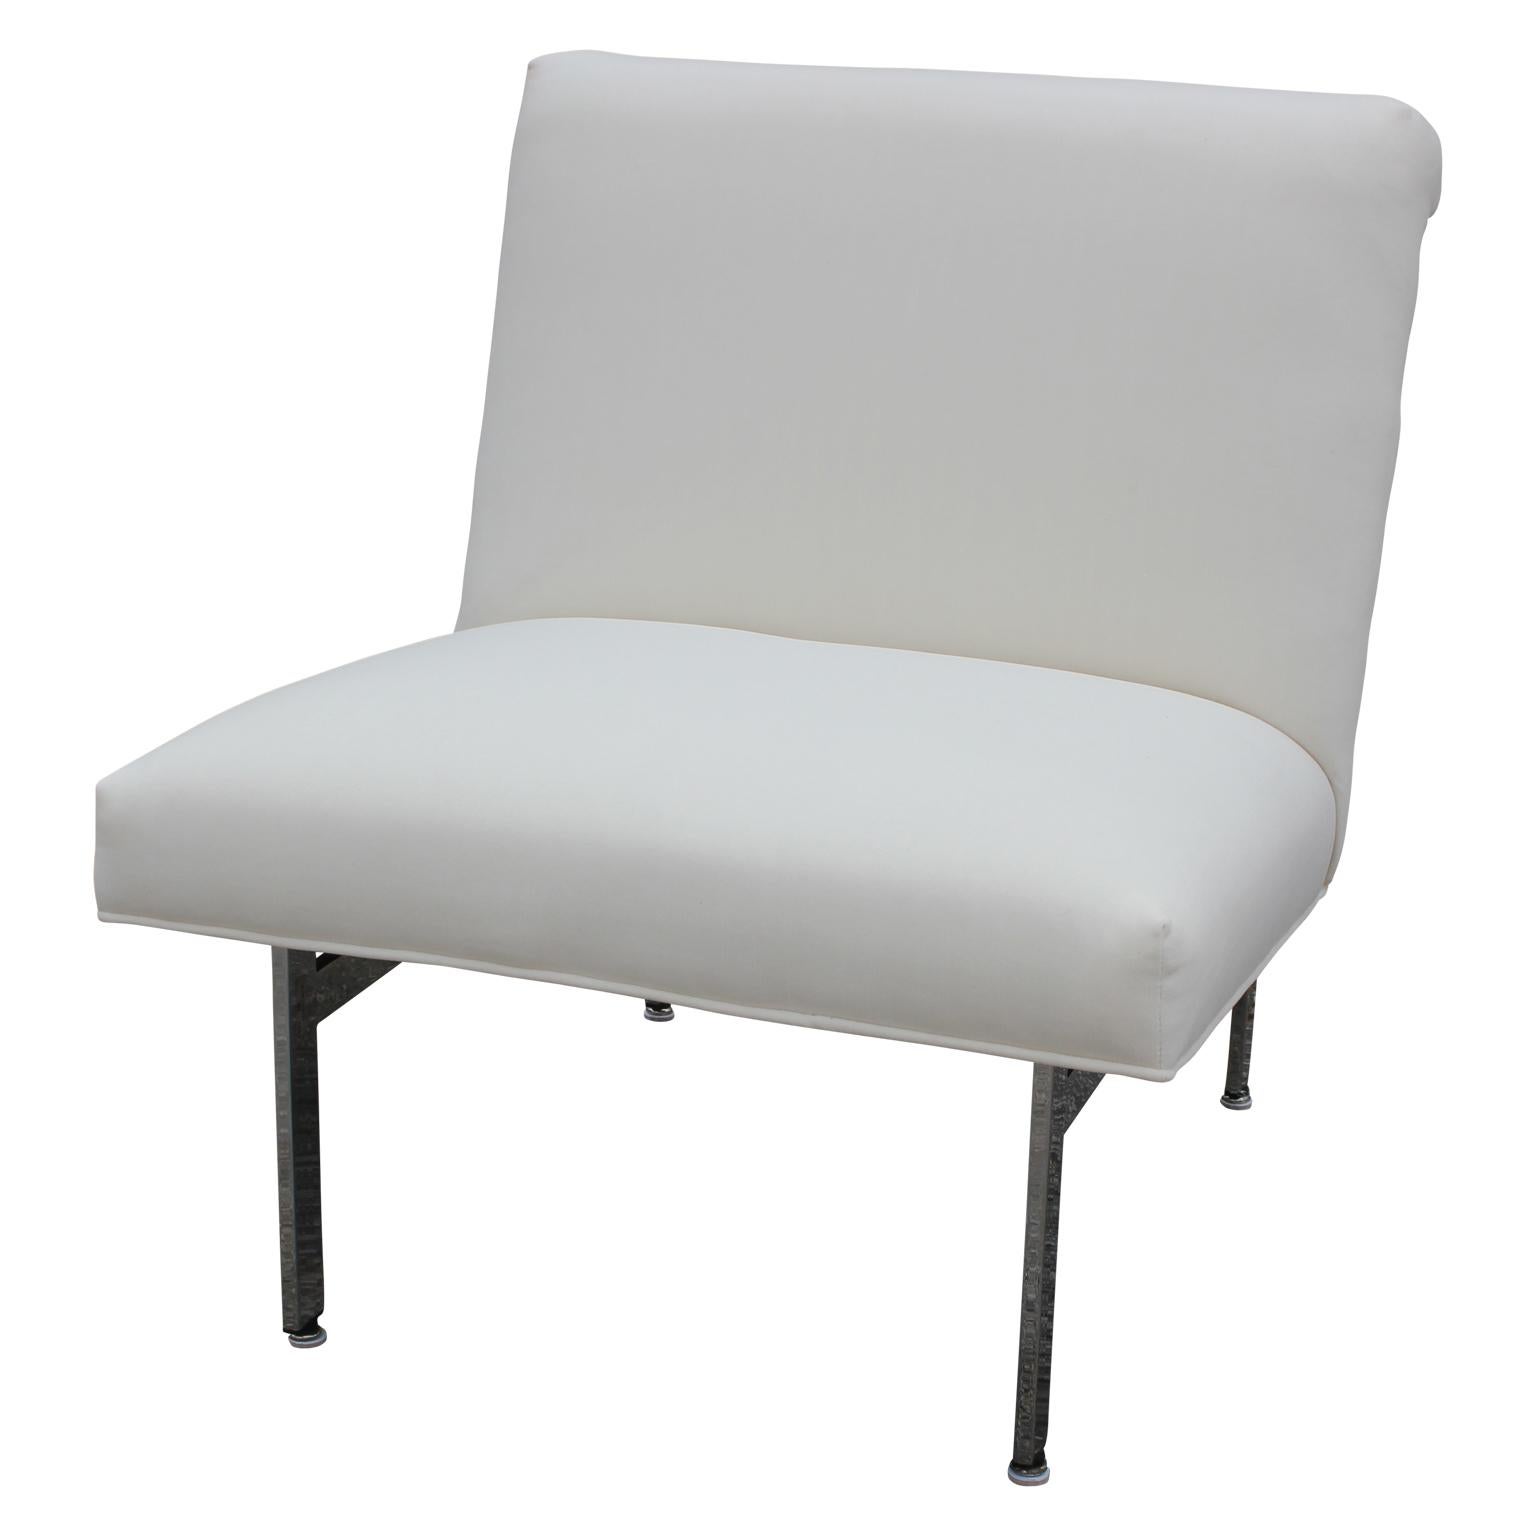 Set of velvet white chairs designed by Florence Knoll. The chairs line up perfectly to form a three-seat couch. The velvet has a soft, smooth touch making it comfortable to sit on. The chrome legs offer a clean look to the white velvet.